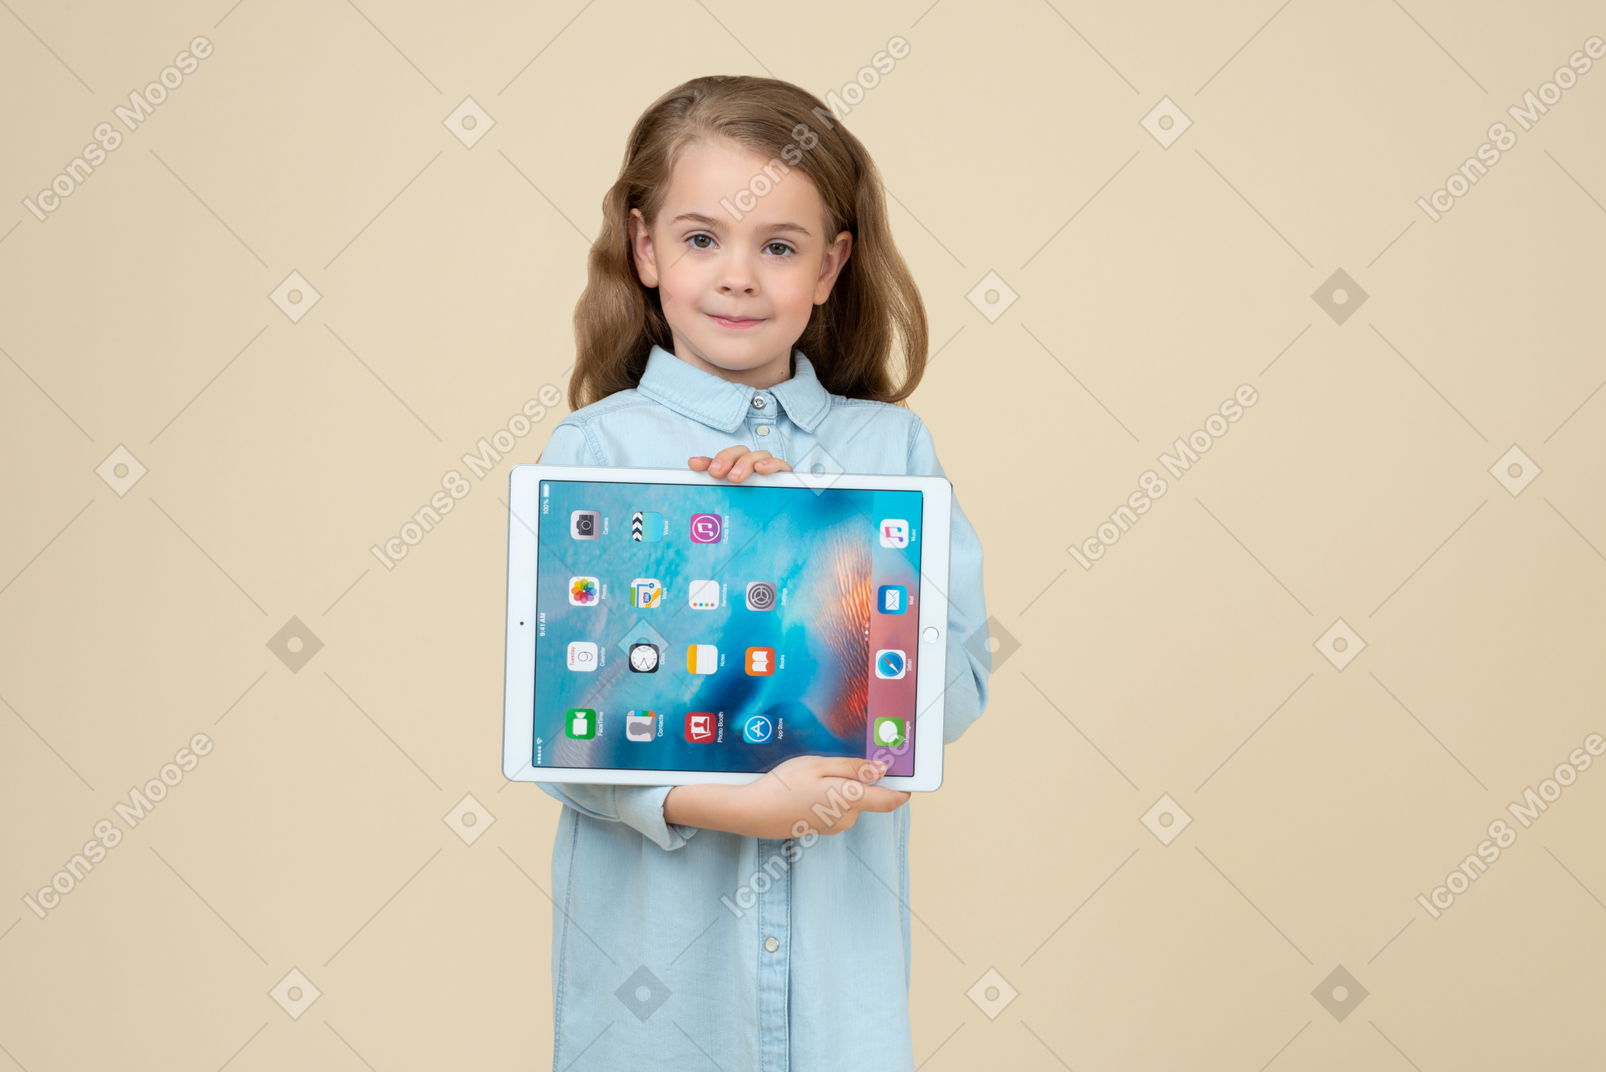 Cute little girl showing a tablet